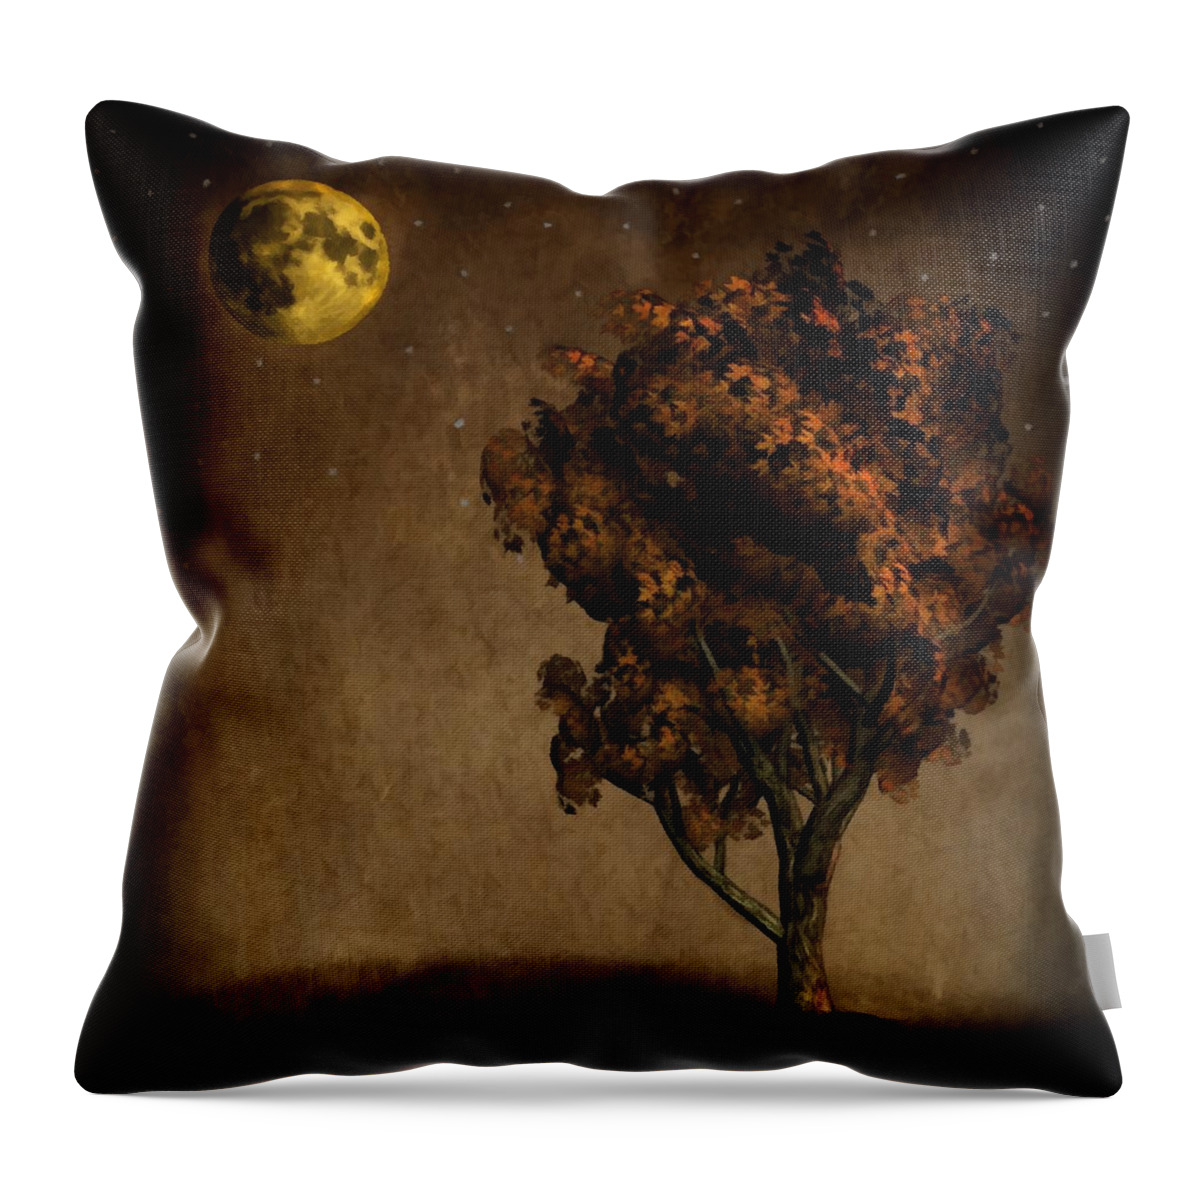 Autumn Throw Pillow featuring the painting Autumn Moon by David Dehner